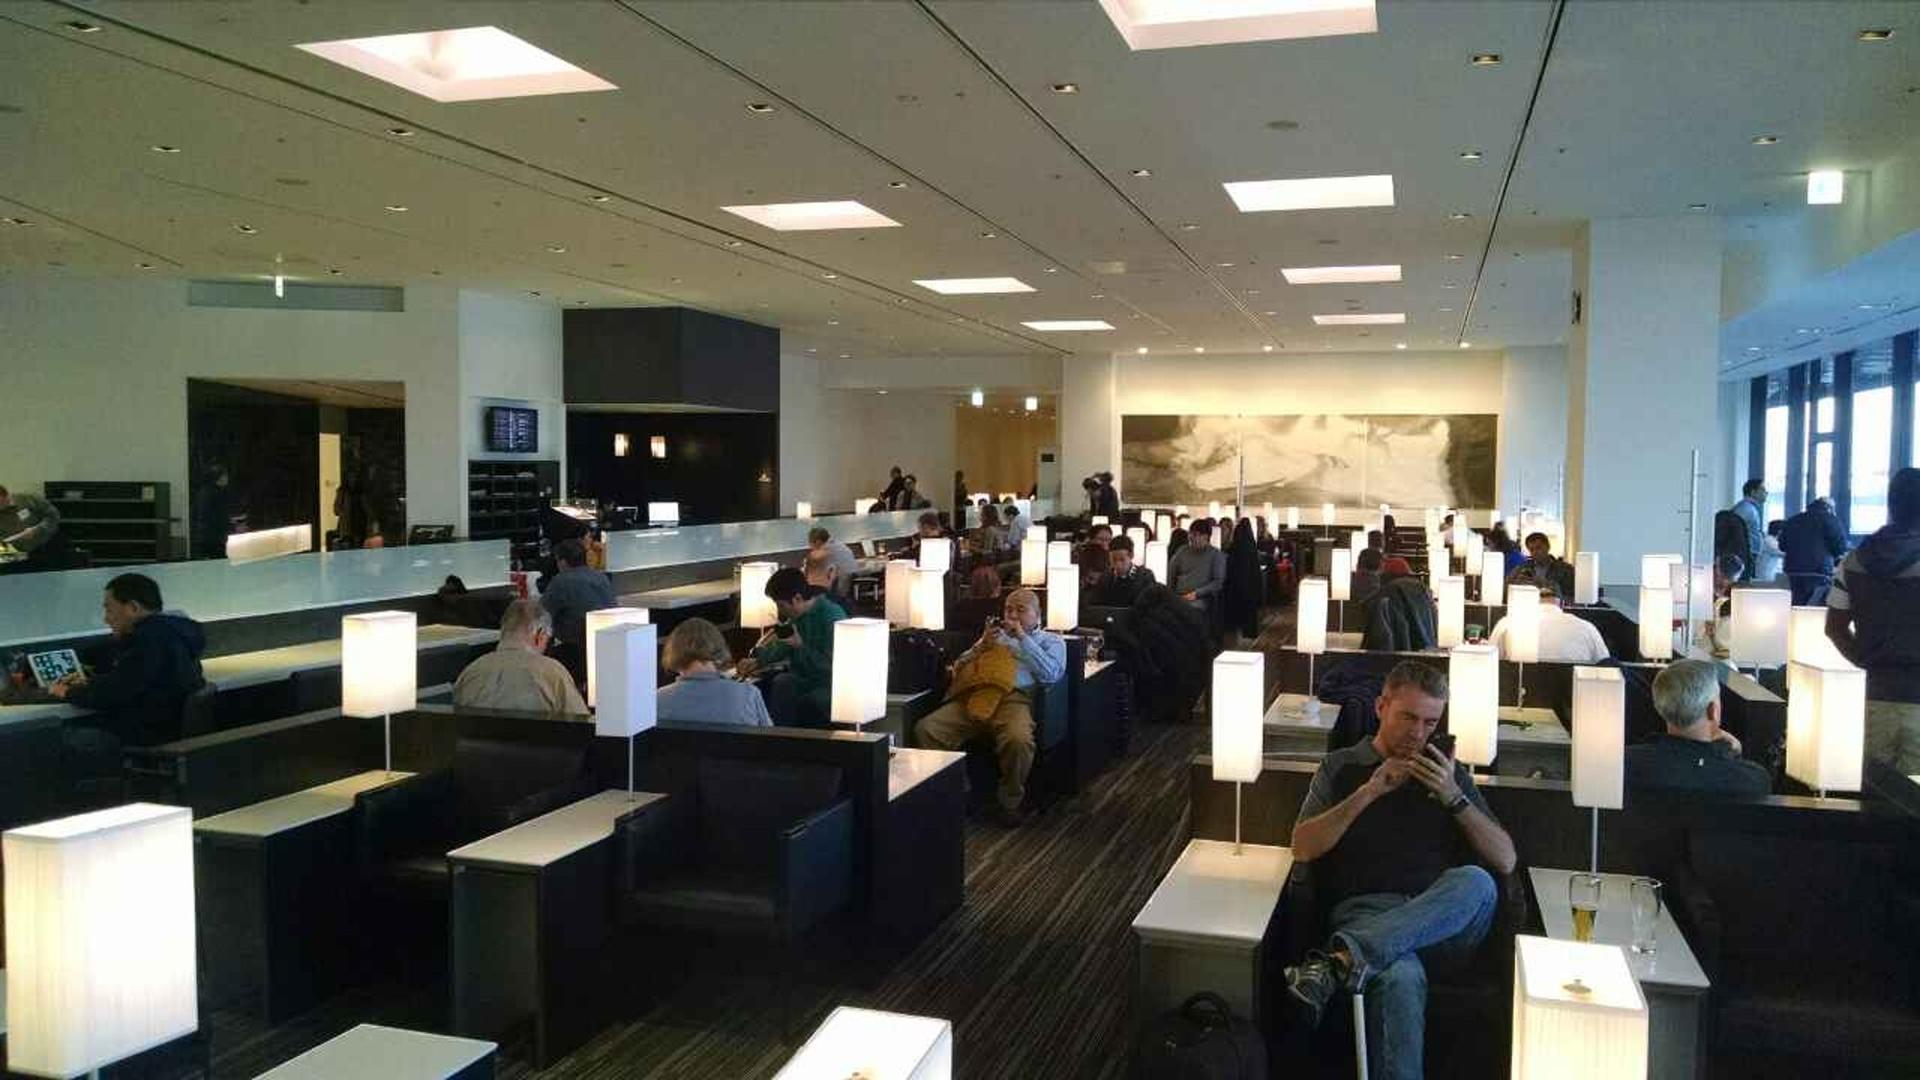 All Nippon Airways ANA Lounge image 25 of 39